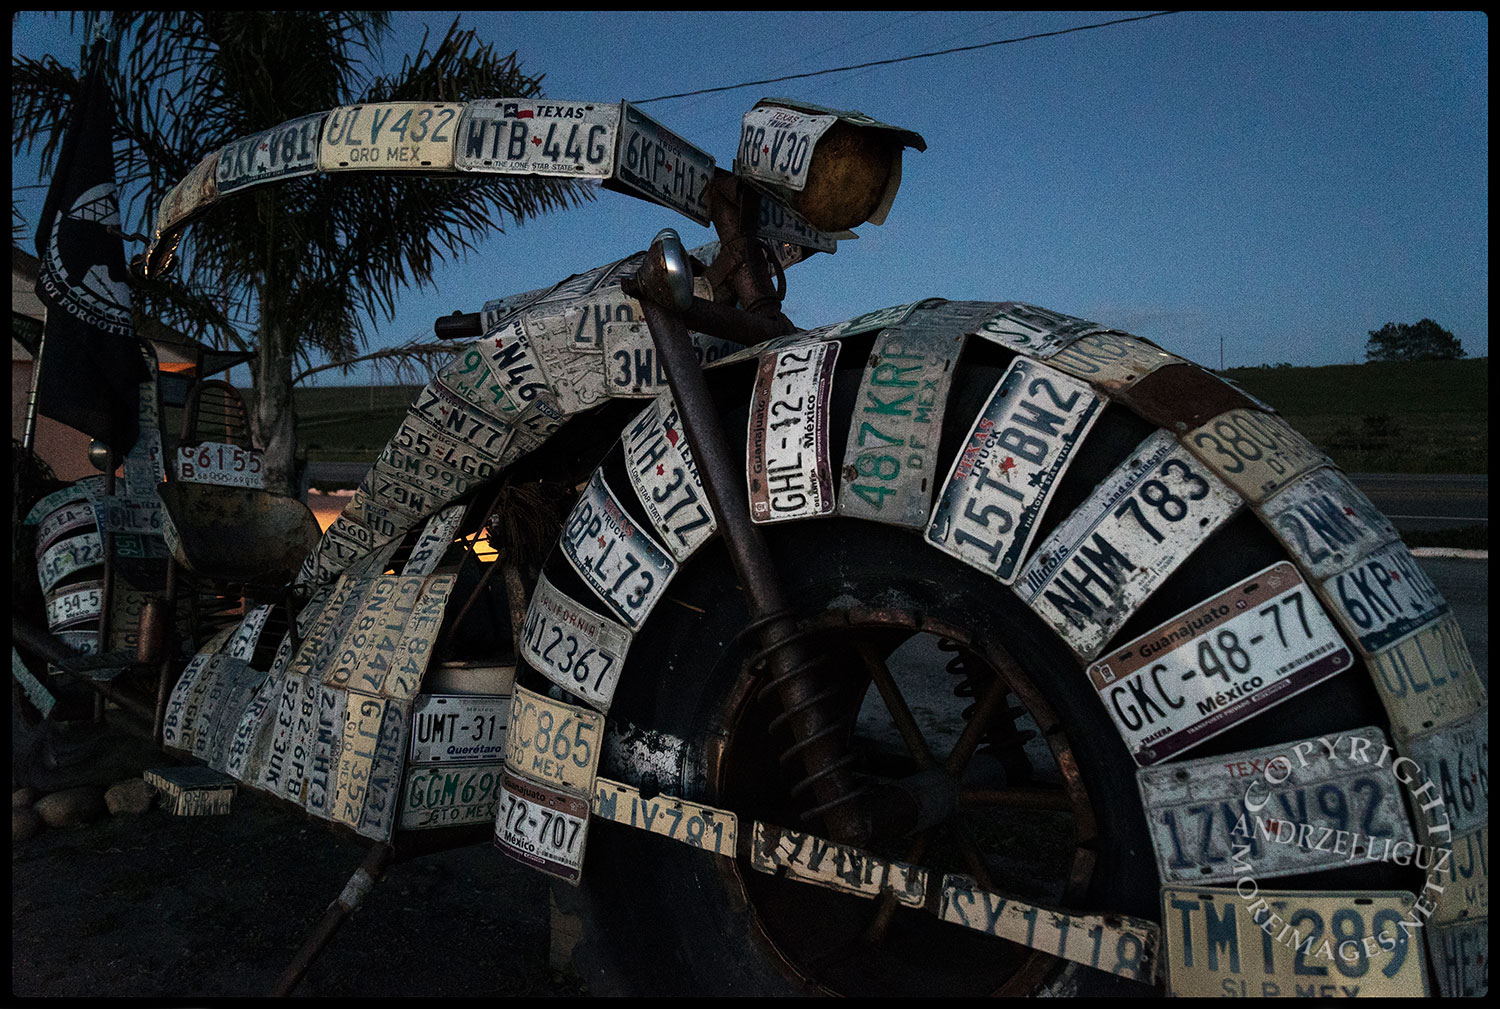 Mexican motorbike sculpture, Highway 1, north of Carmel, CA 2015-03-02